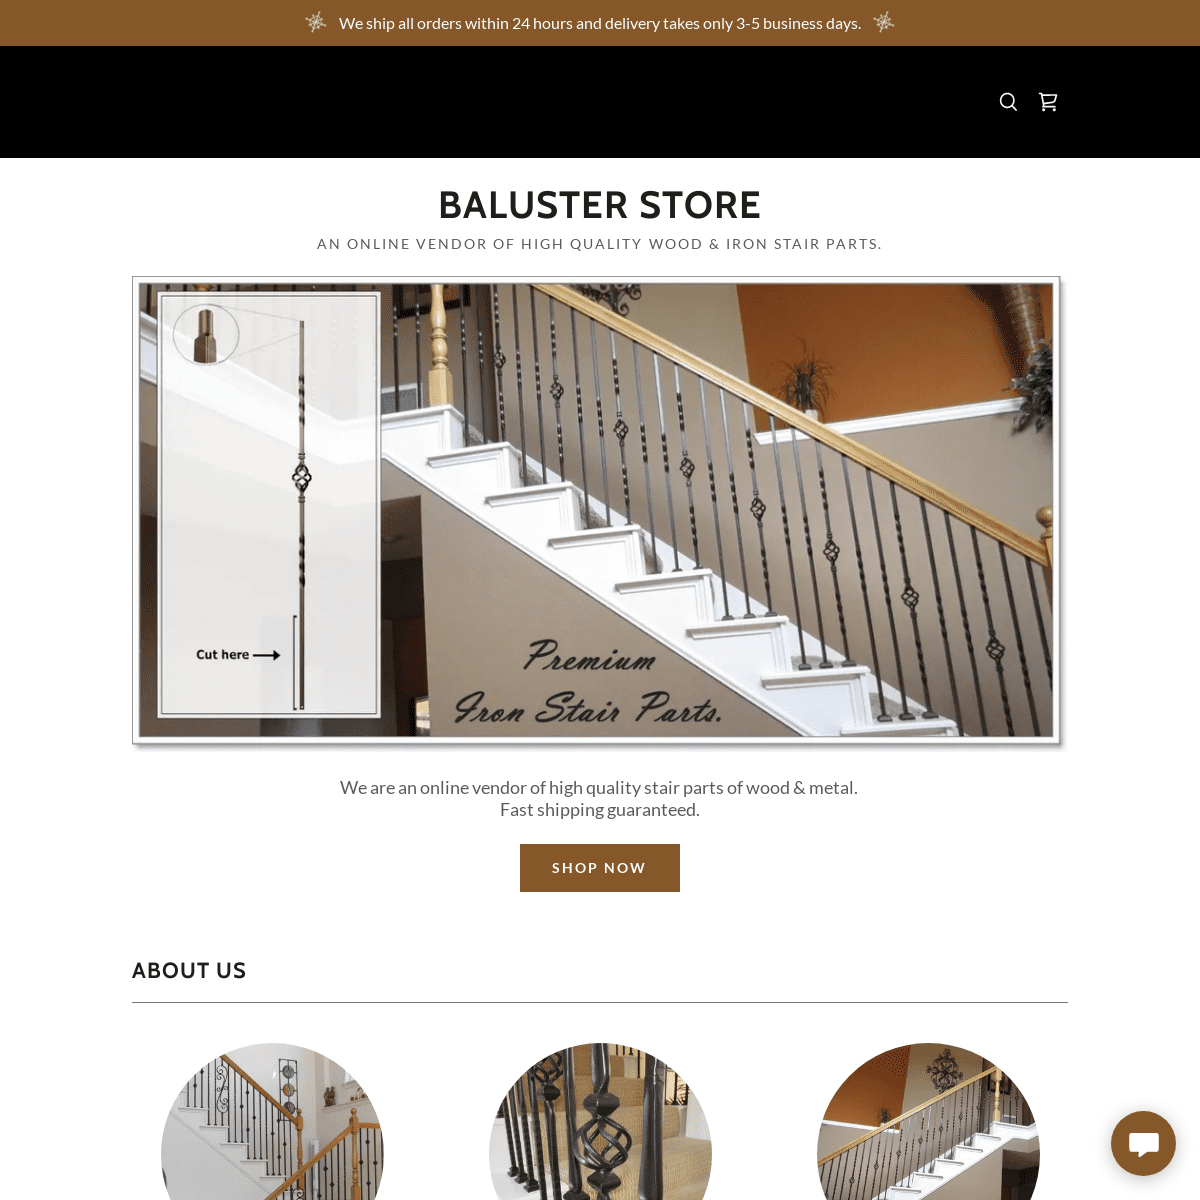 A complete backup of https://balusterstore.com